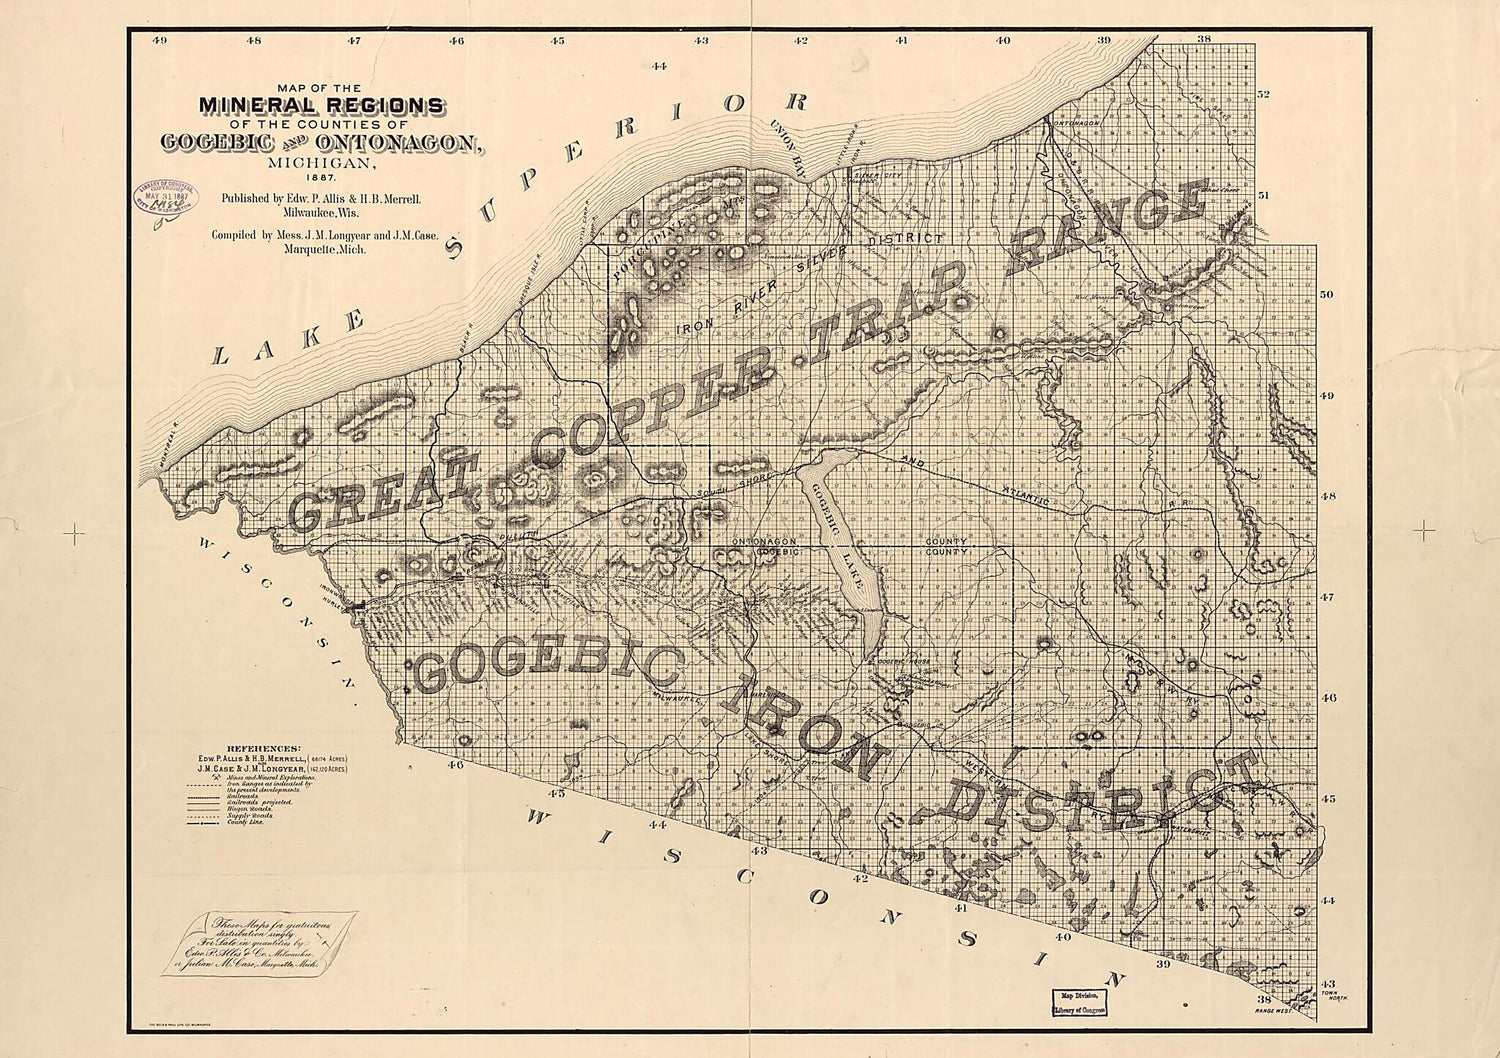 This old map of Map of the Mineral Regions of the Counties of Gogebic and Ontonagon, Michigan from 1887 was created by J. M. Case, John Munro Longyear in 1887